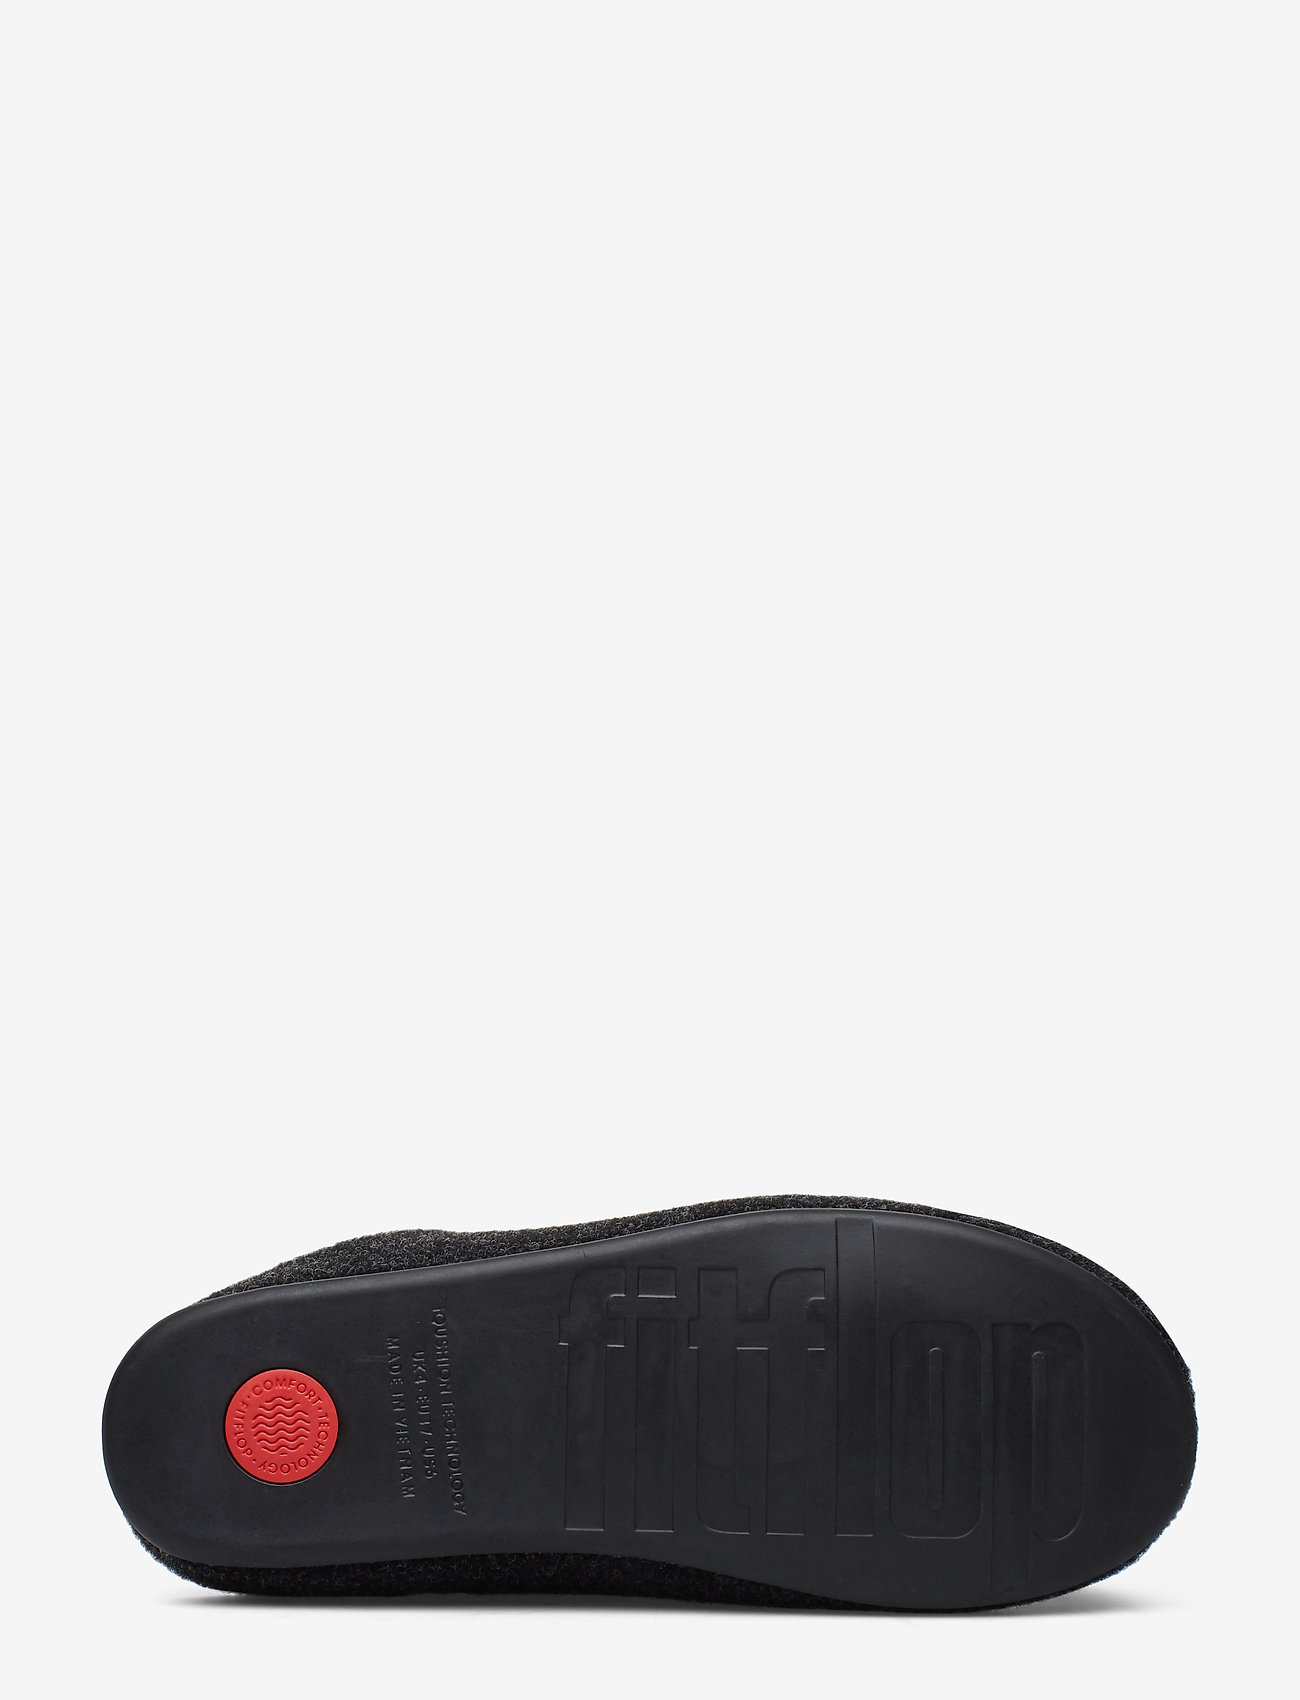 fitflop felt slippers